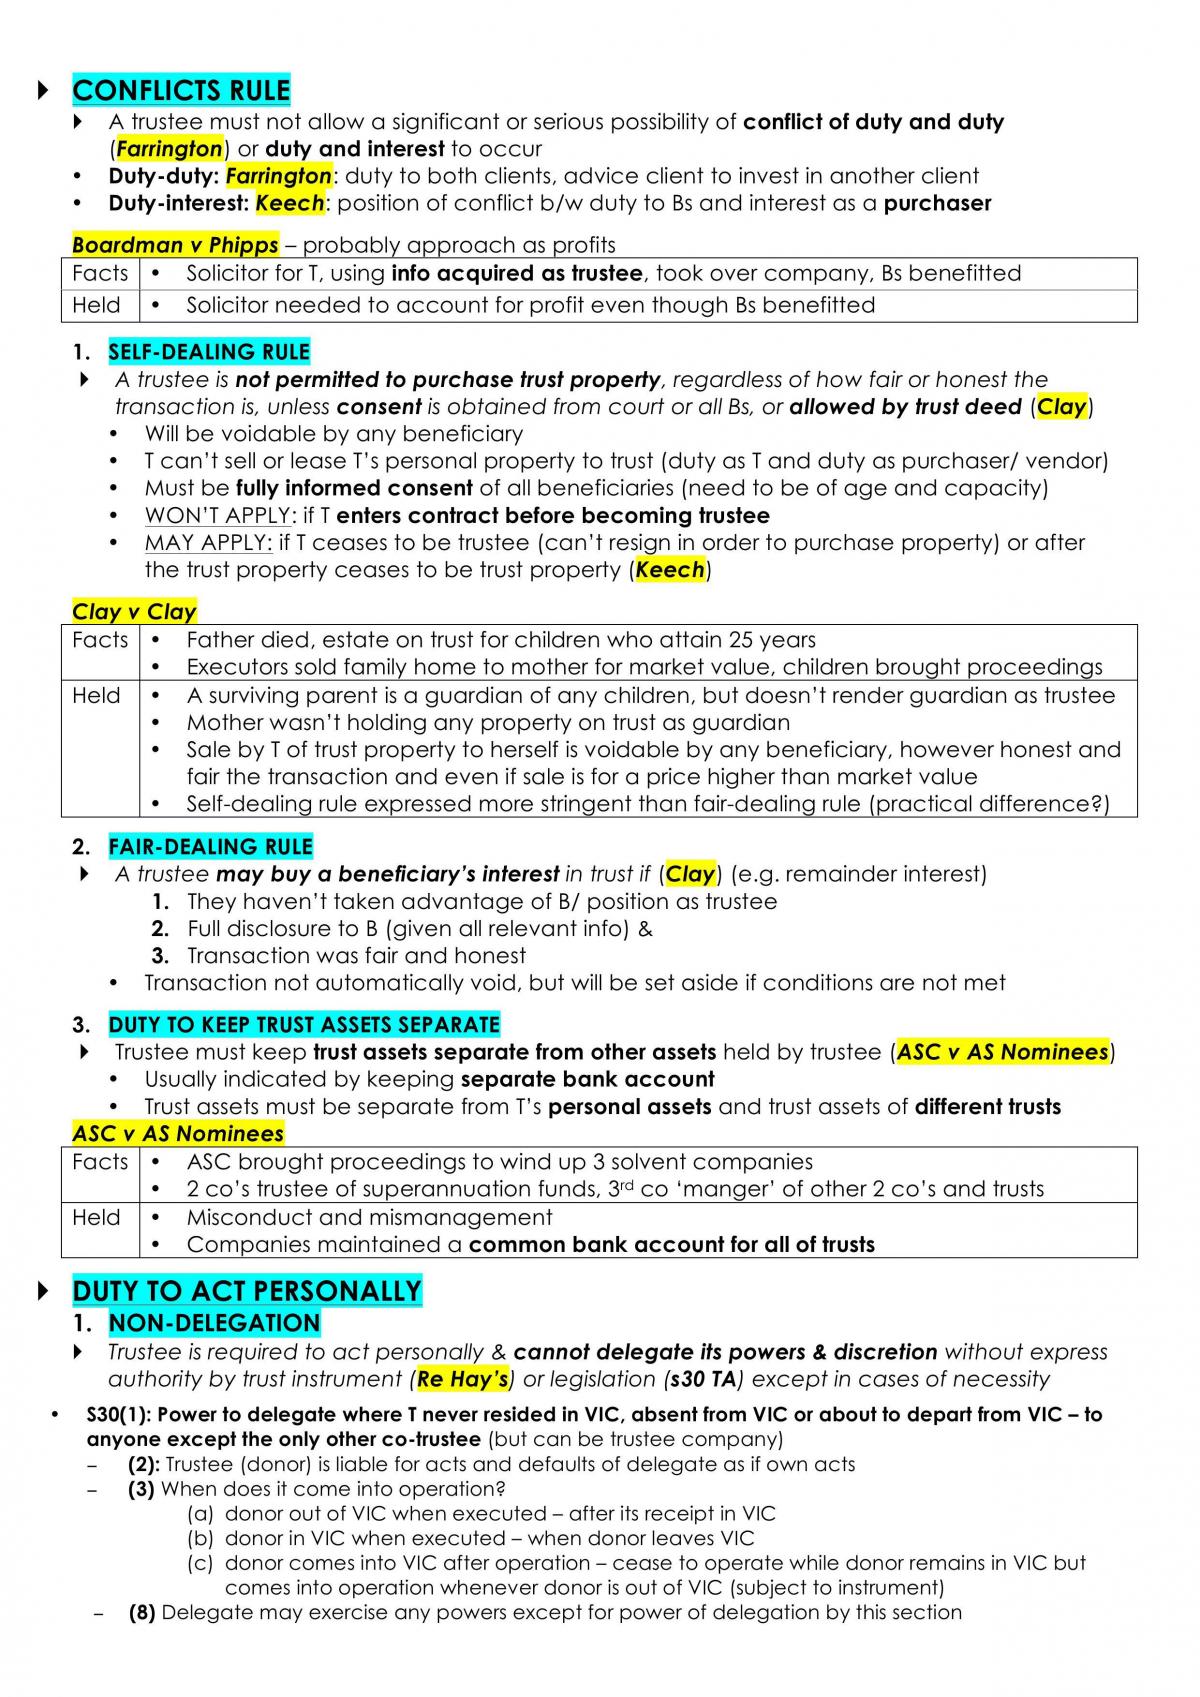 HD LAW4170 Full Exam Notes - Page 30